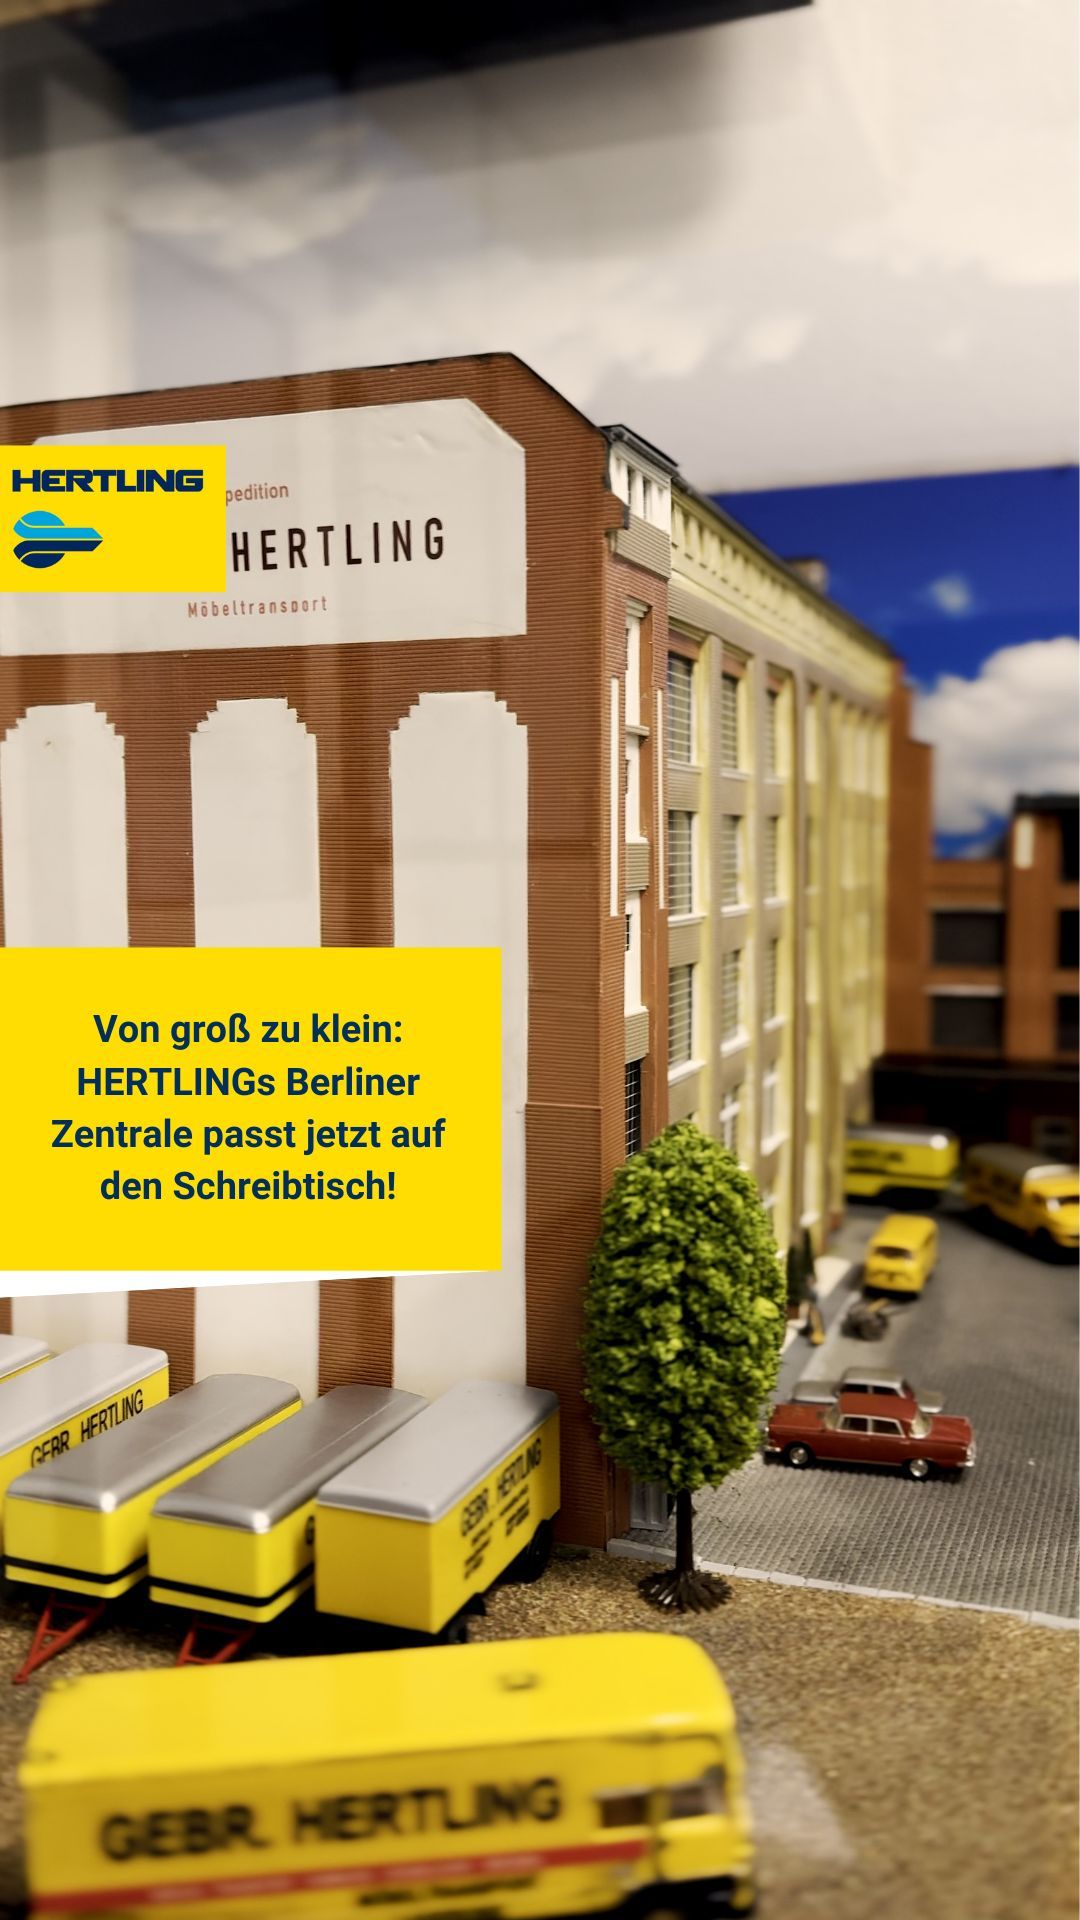 Photo of a miniature Hertling facility